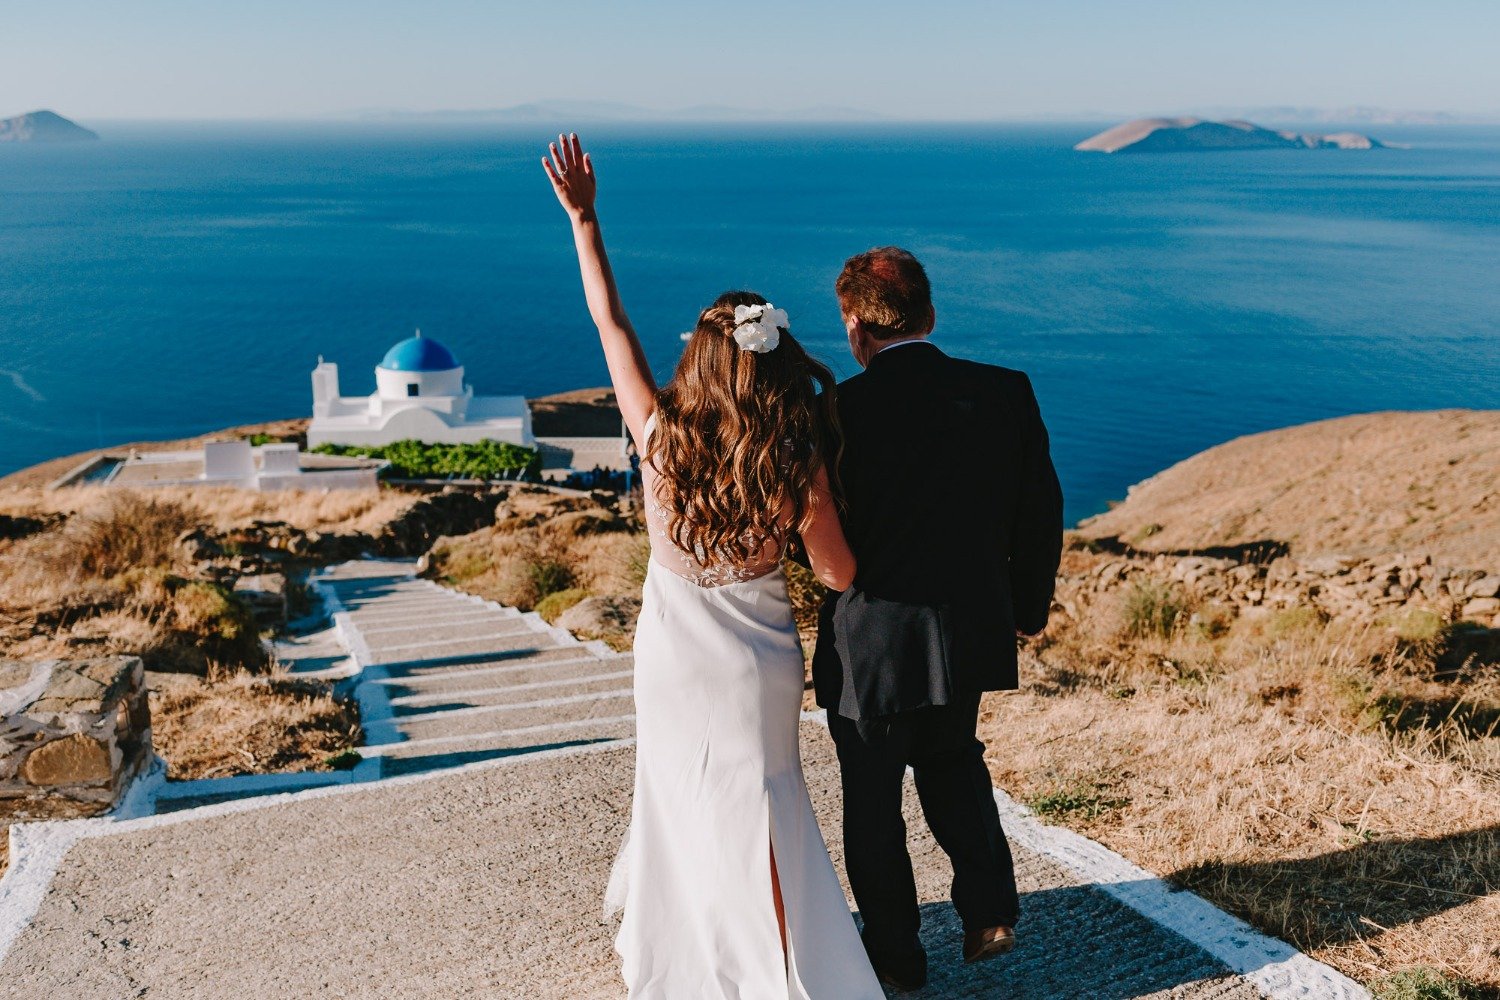 Here comes the bride in Cyclades